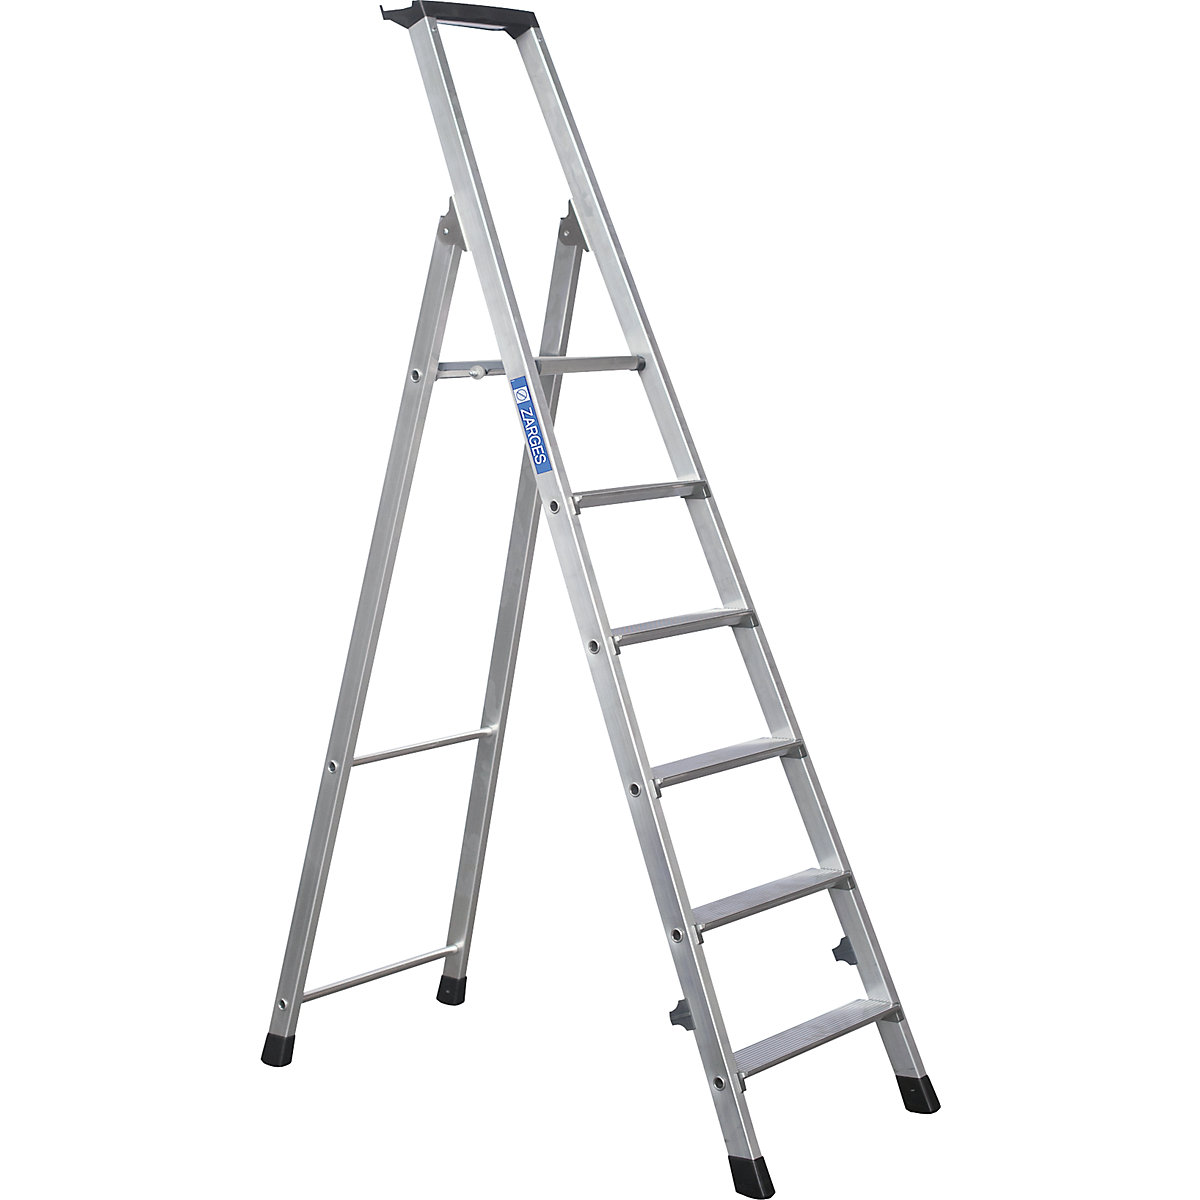 Folding step ladder, single sided access - ZARGES